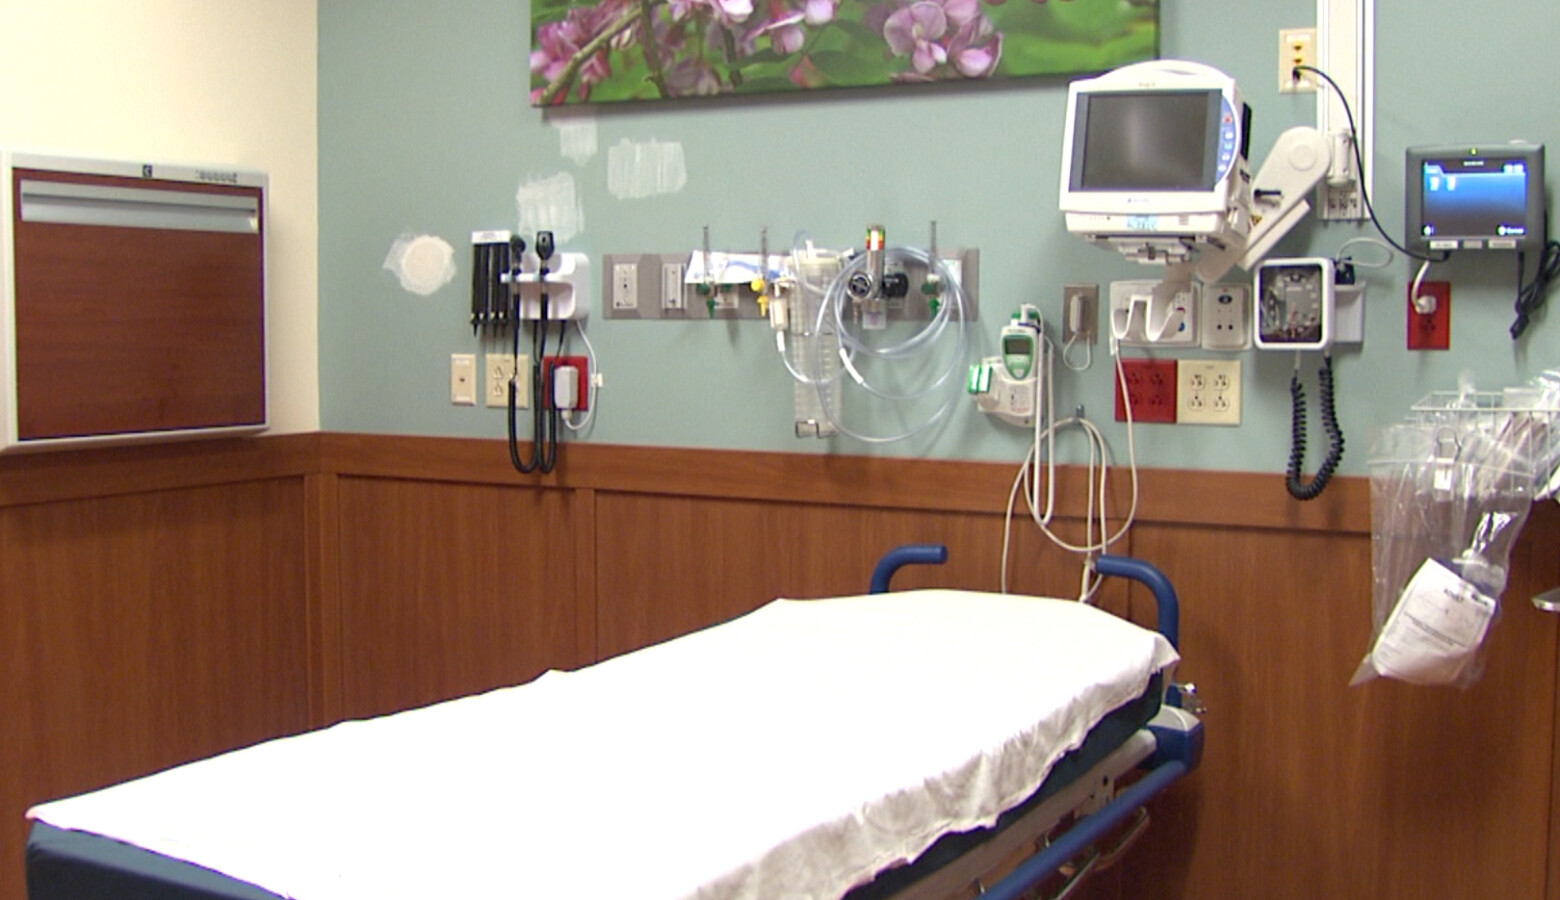 State hospitals are dealing with surging hospitalization rates, which could lead to staff shortages across the state. (FILE PHOTO: Steve Burns/WTIU)